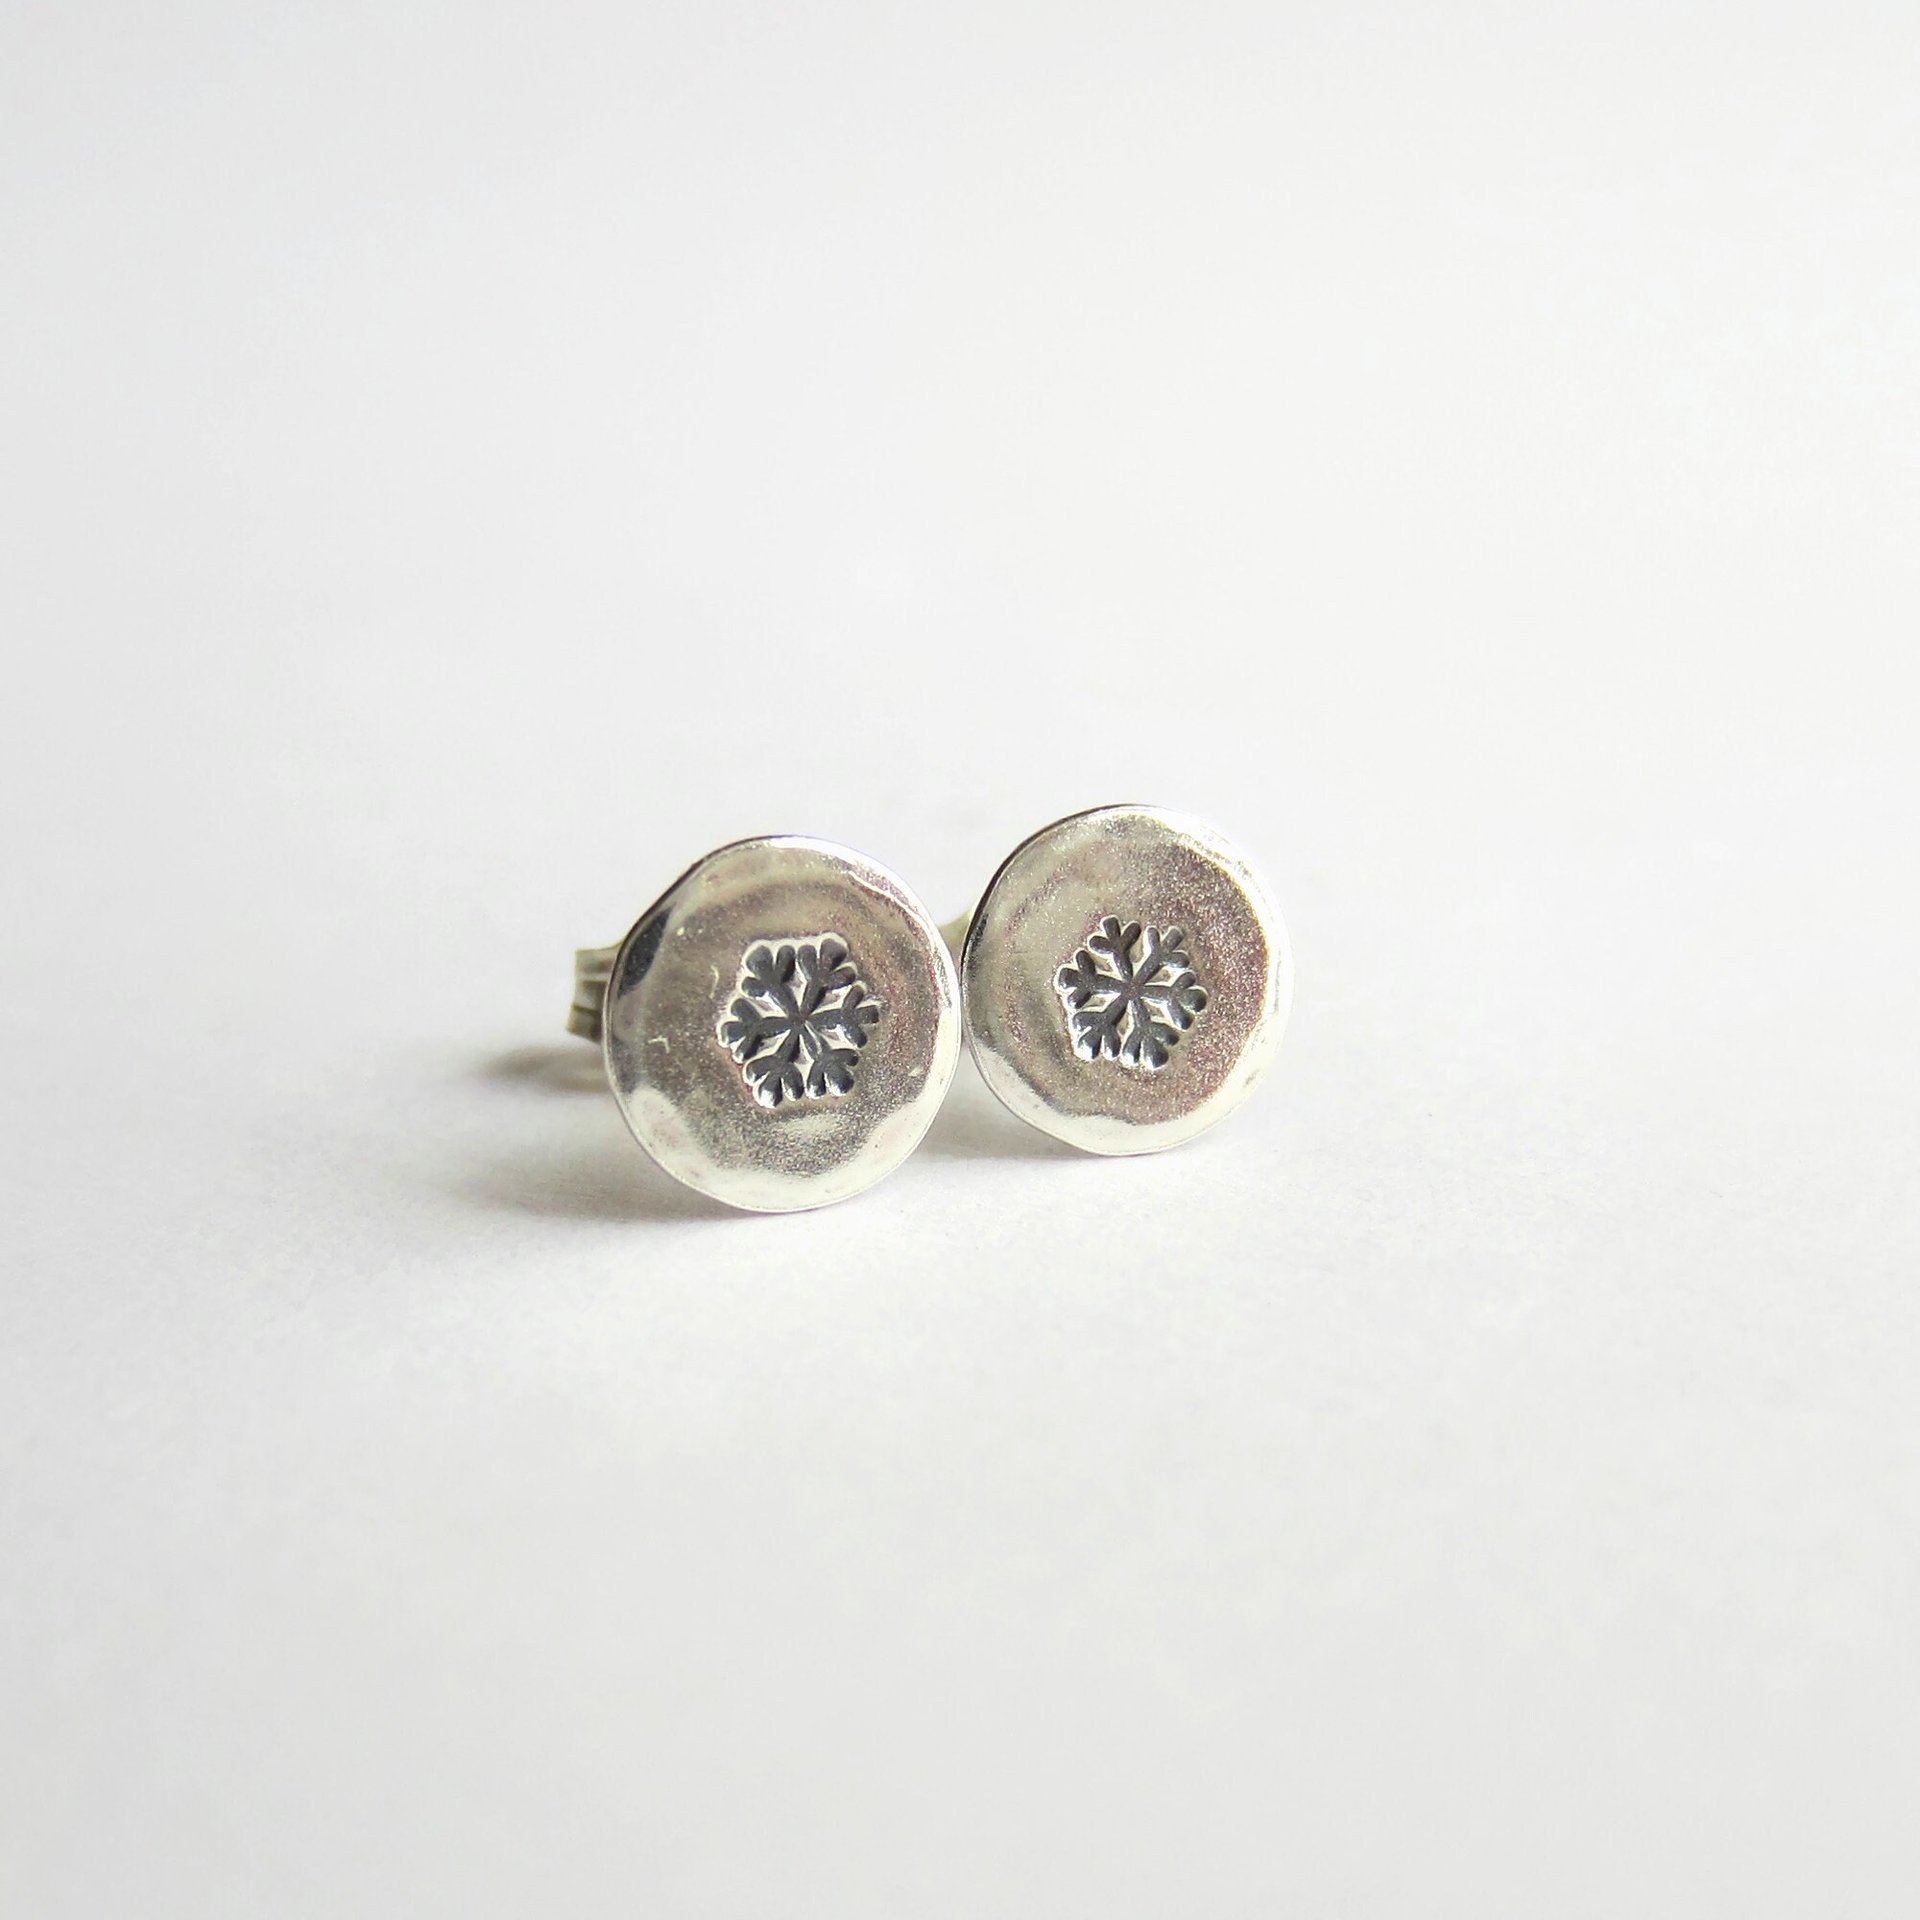 Hand Stamped Sterling Silver Snowflake Stud Earrings ~ Handmade by The Tiny Tree Frog Jewellery